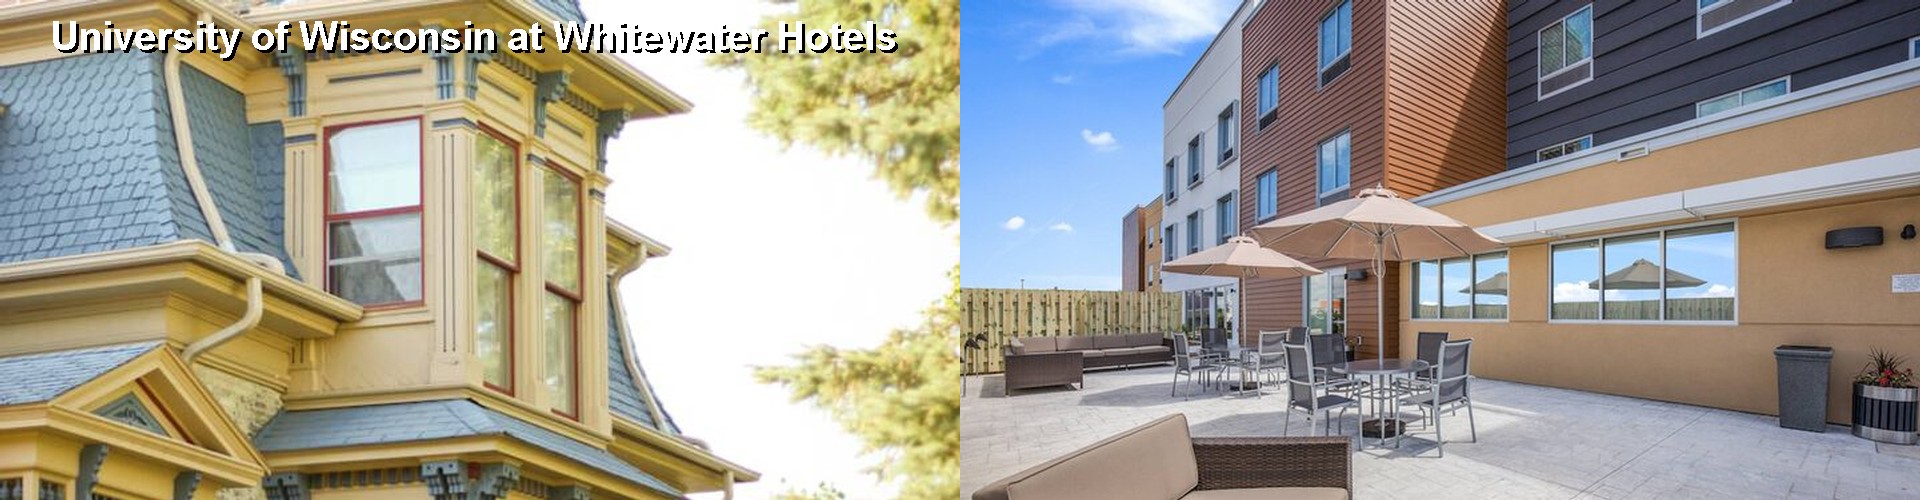 5 Best Hotels near University of Wisconsin at Whitewater